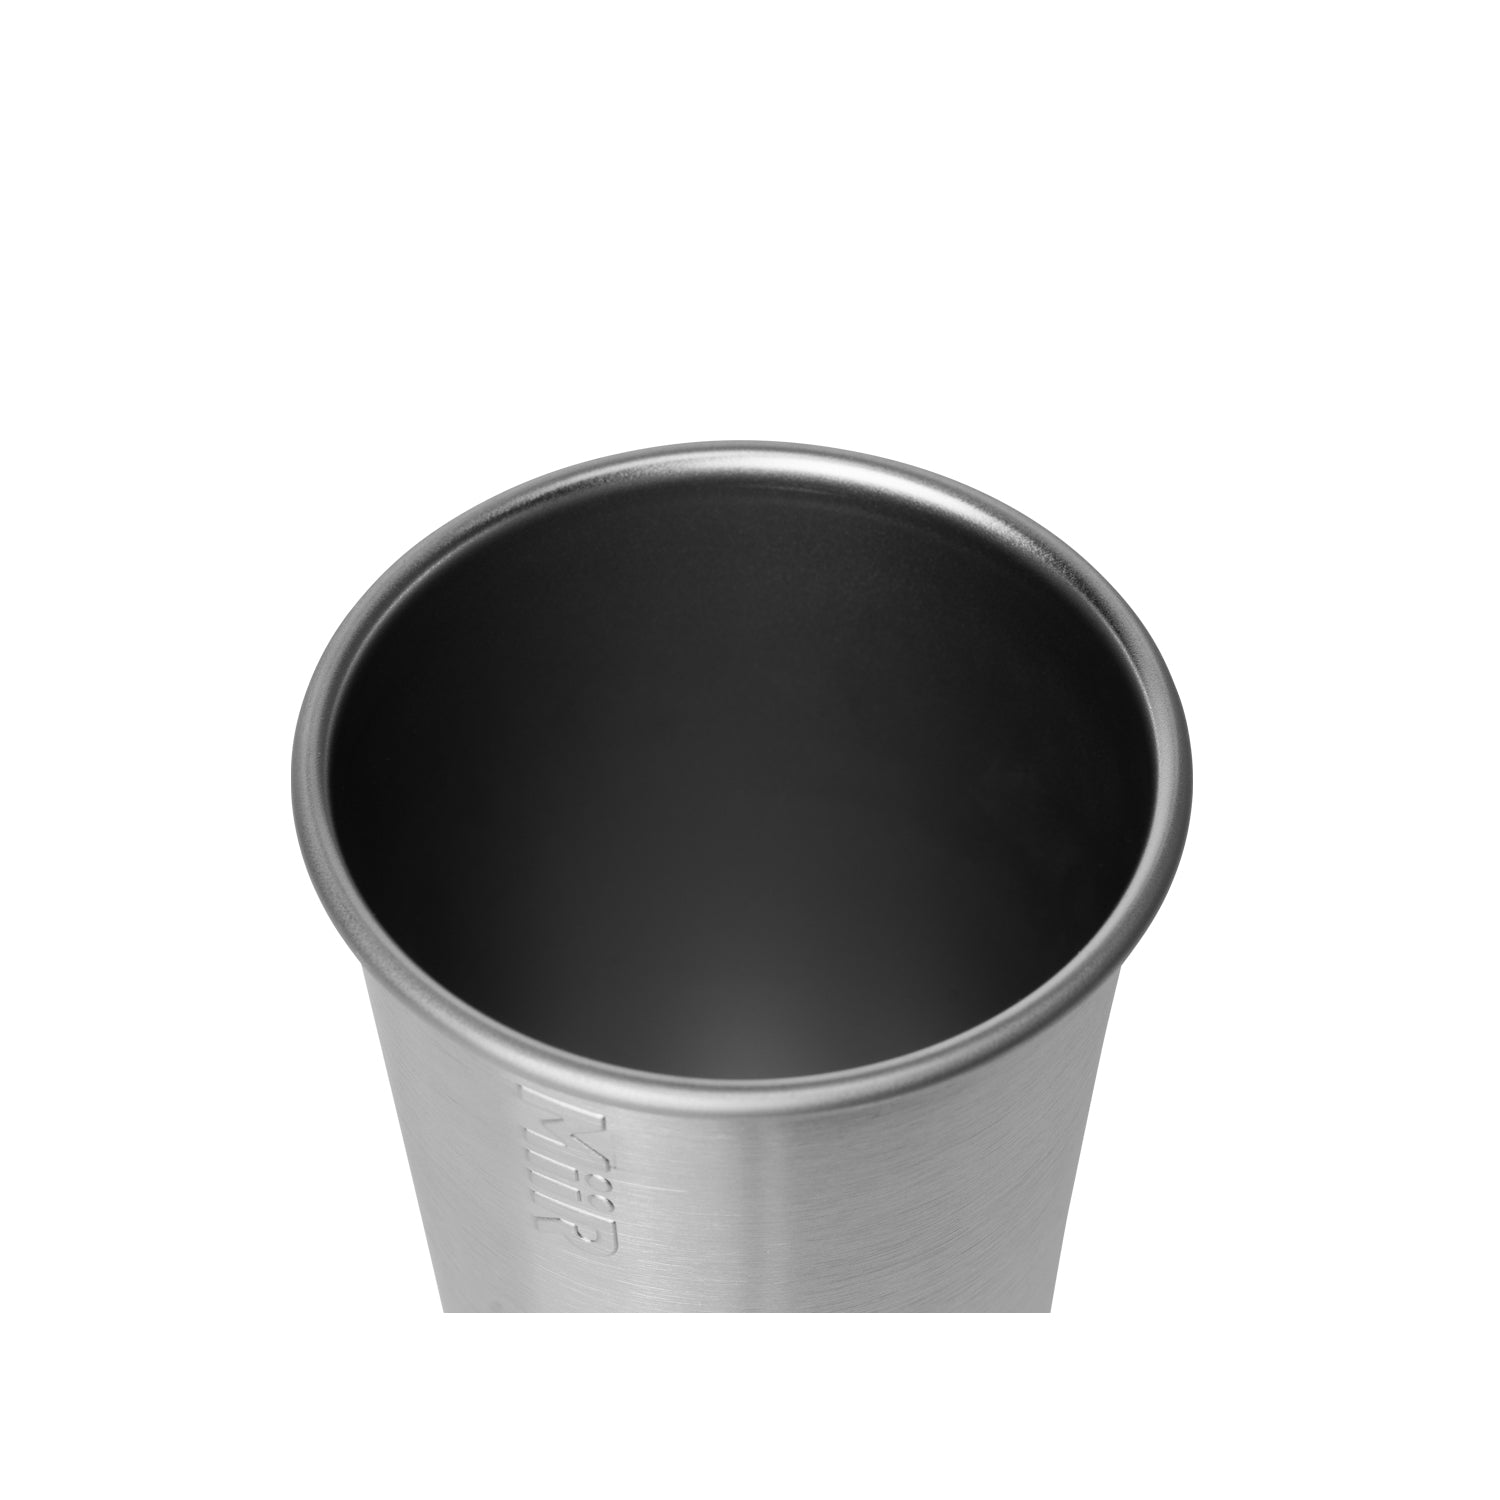 MiiR, 16oz Pint Cup, Classic, Stainless, 16 oz